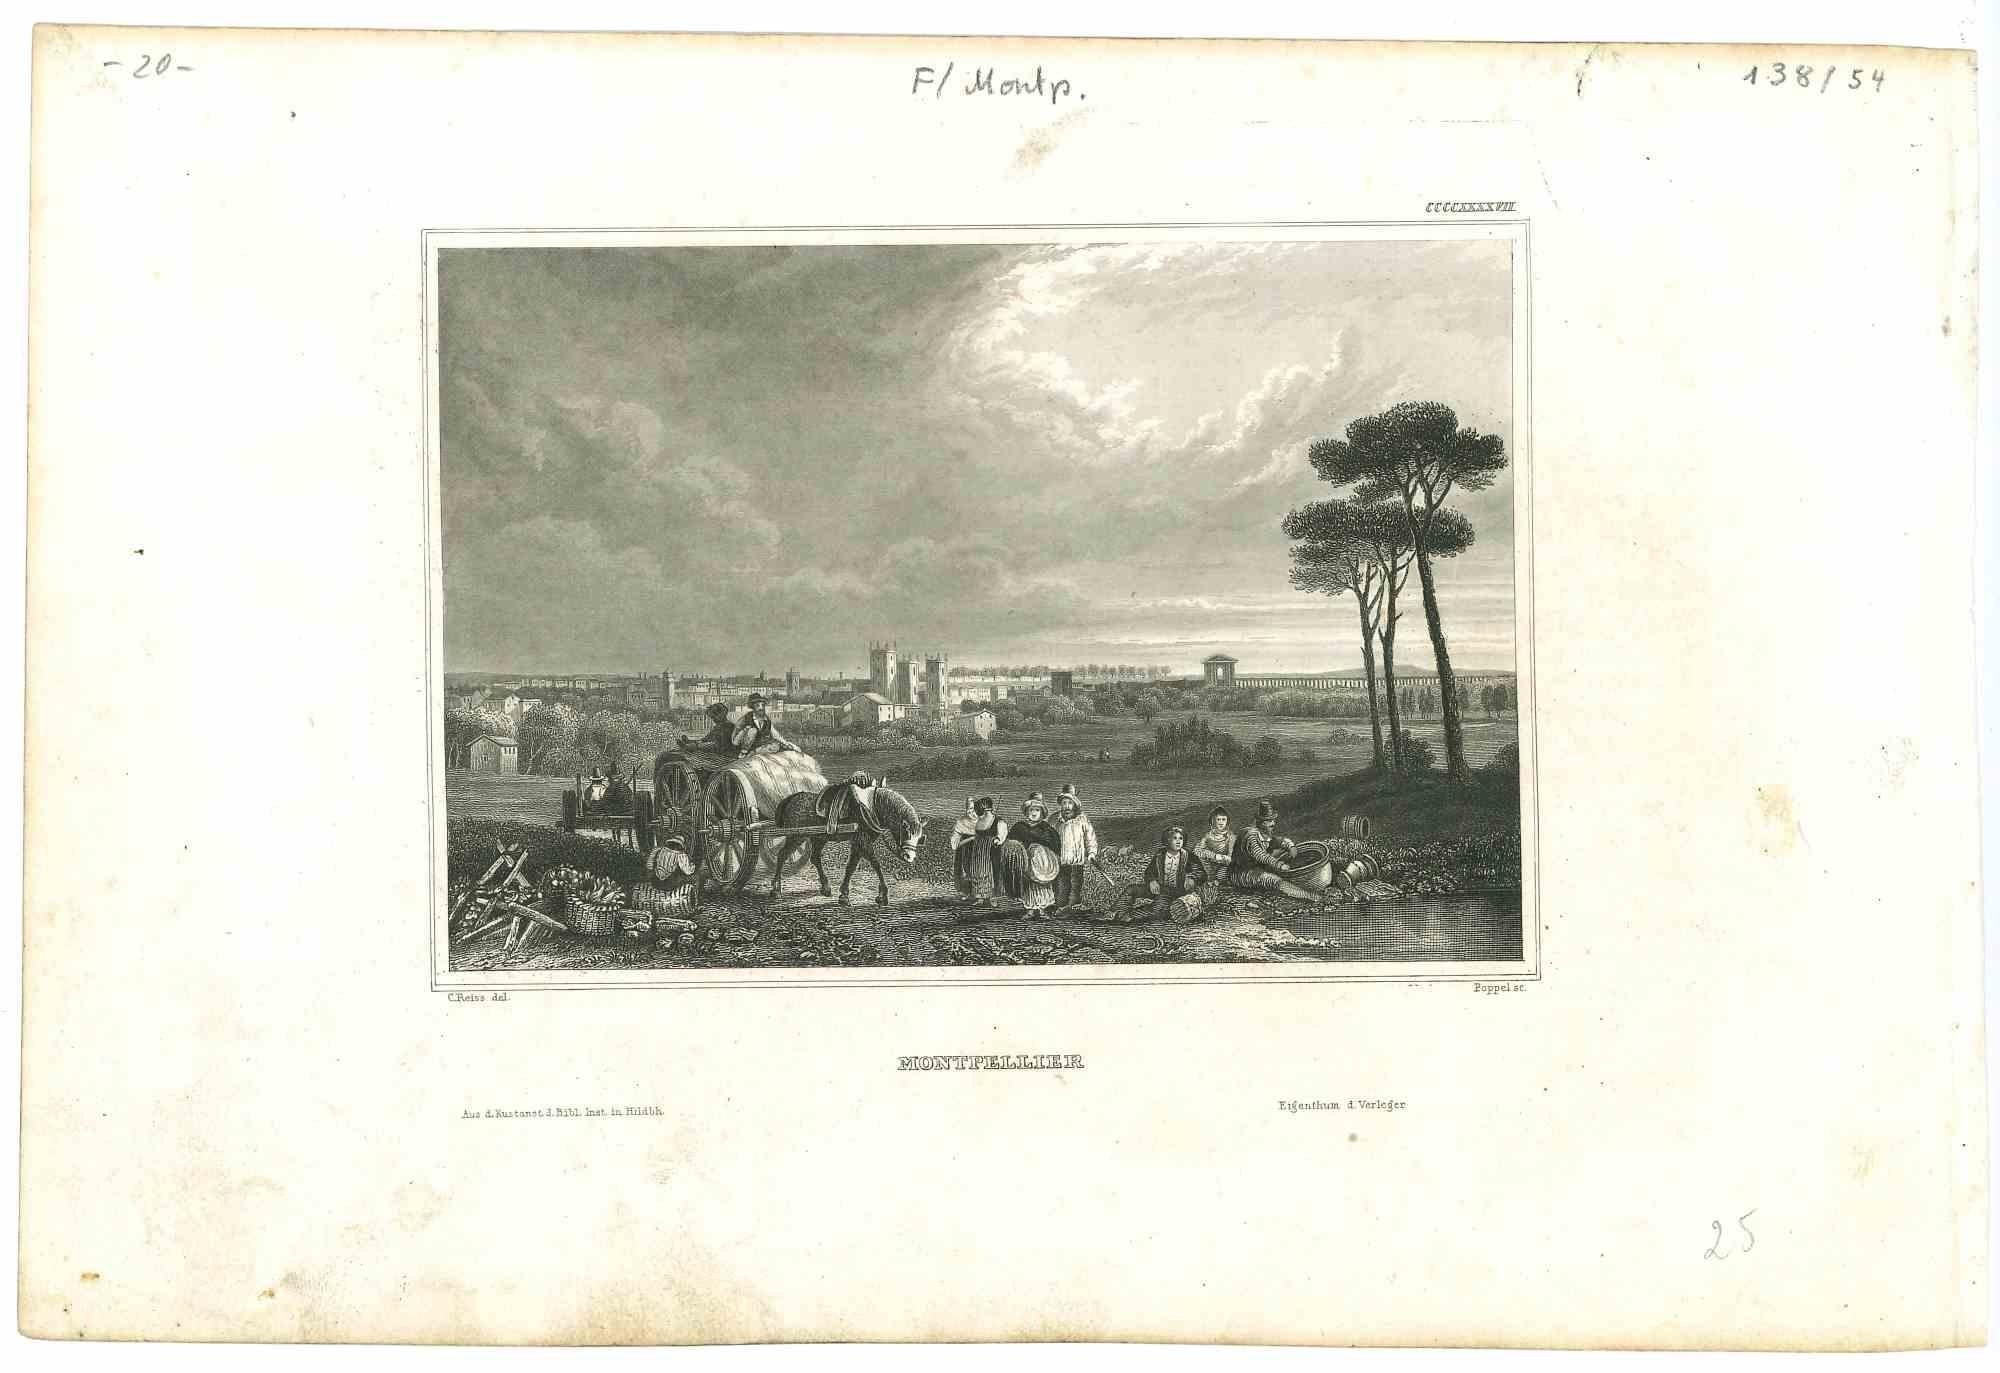 Unknown Figurative Art - Ancient View of Montpellier - Original Lithograph - Mid-19th Century